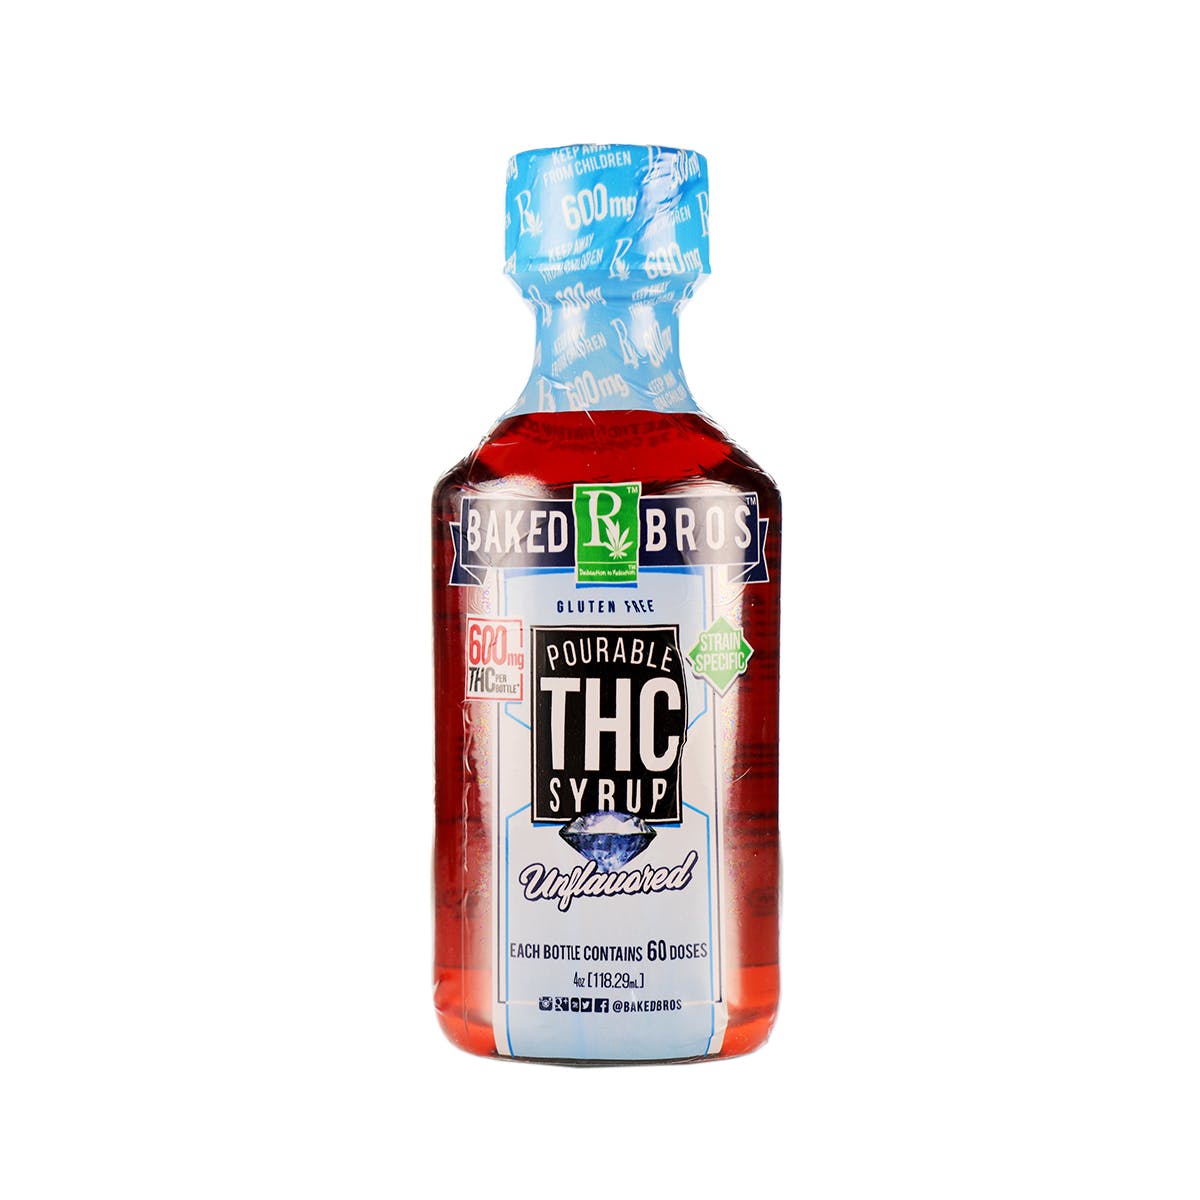 THC Syrup Unflavored 600mg